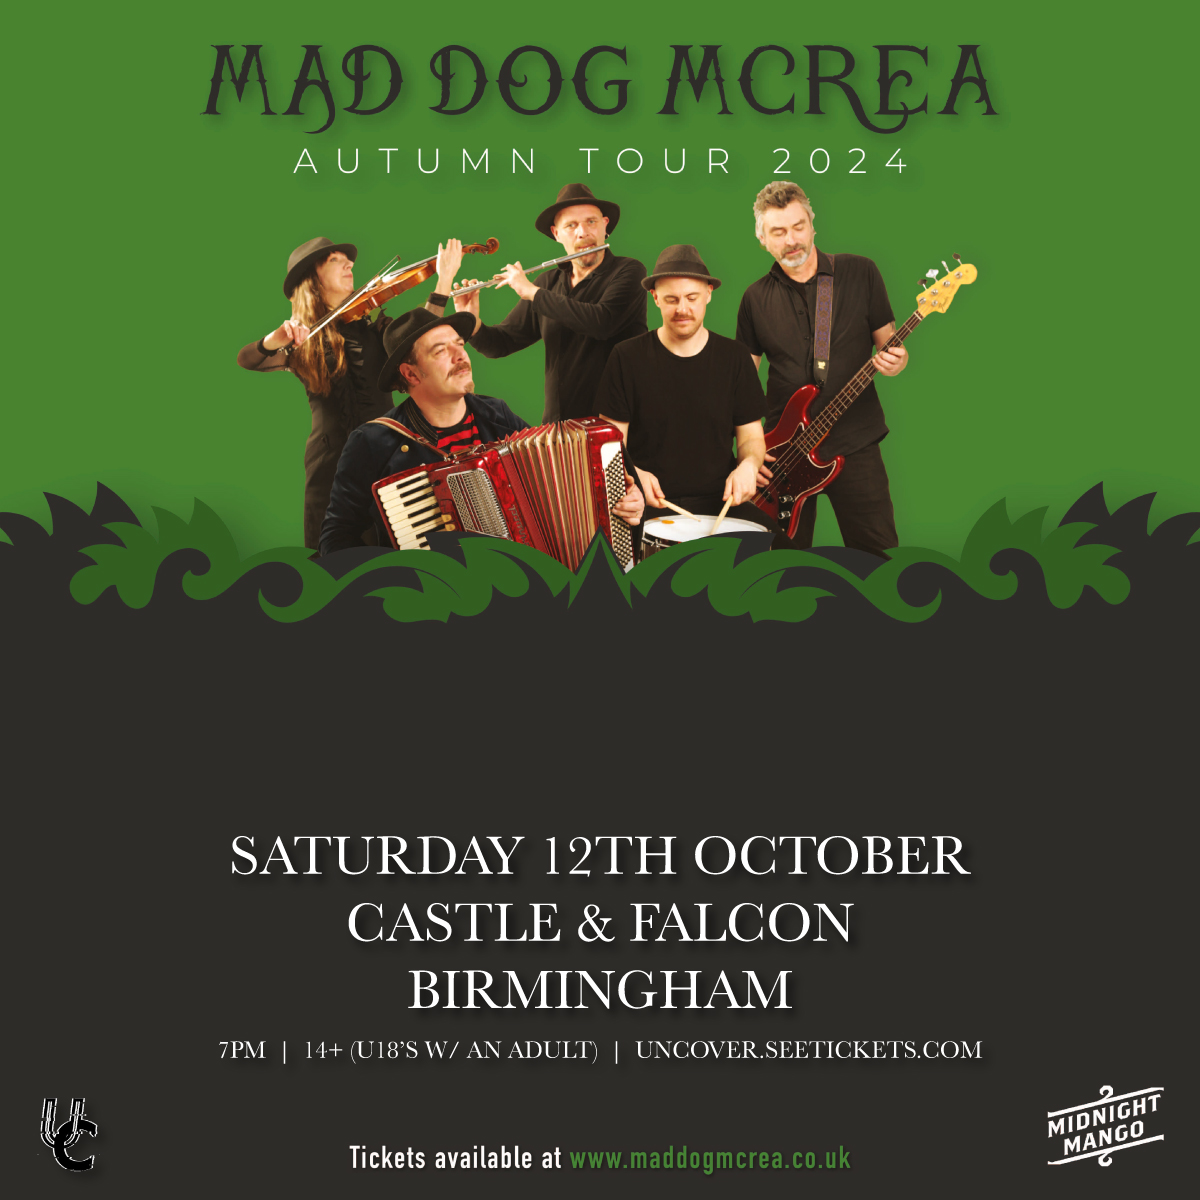 NEW SHOW 💙 @MadDogMcrea are set to return to The @CastleandFalcon with their unique mixture of folk rock, pop, gypsy jazz and bluegrass on Saturday, 12th October 💥 Tickets on sale now: bit.ly/3VrJVGQ